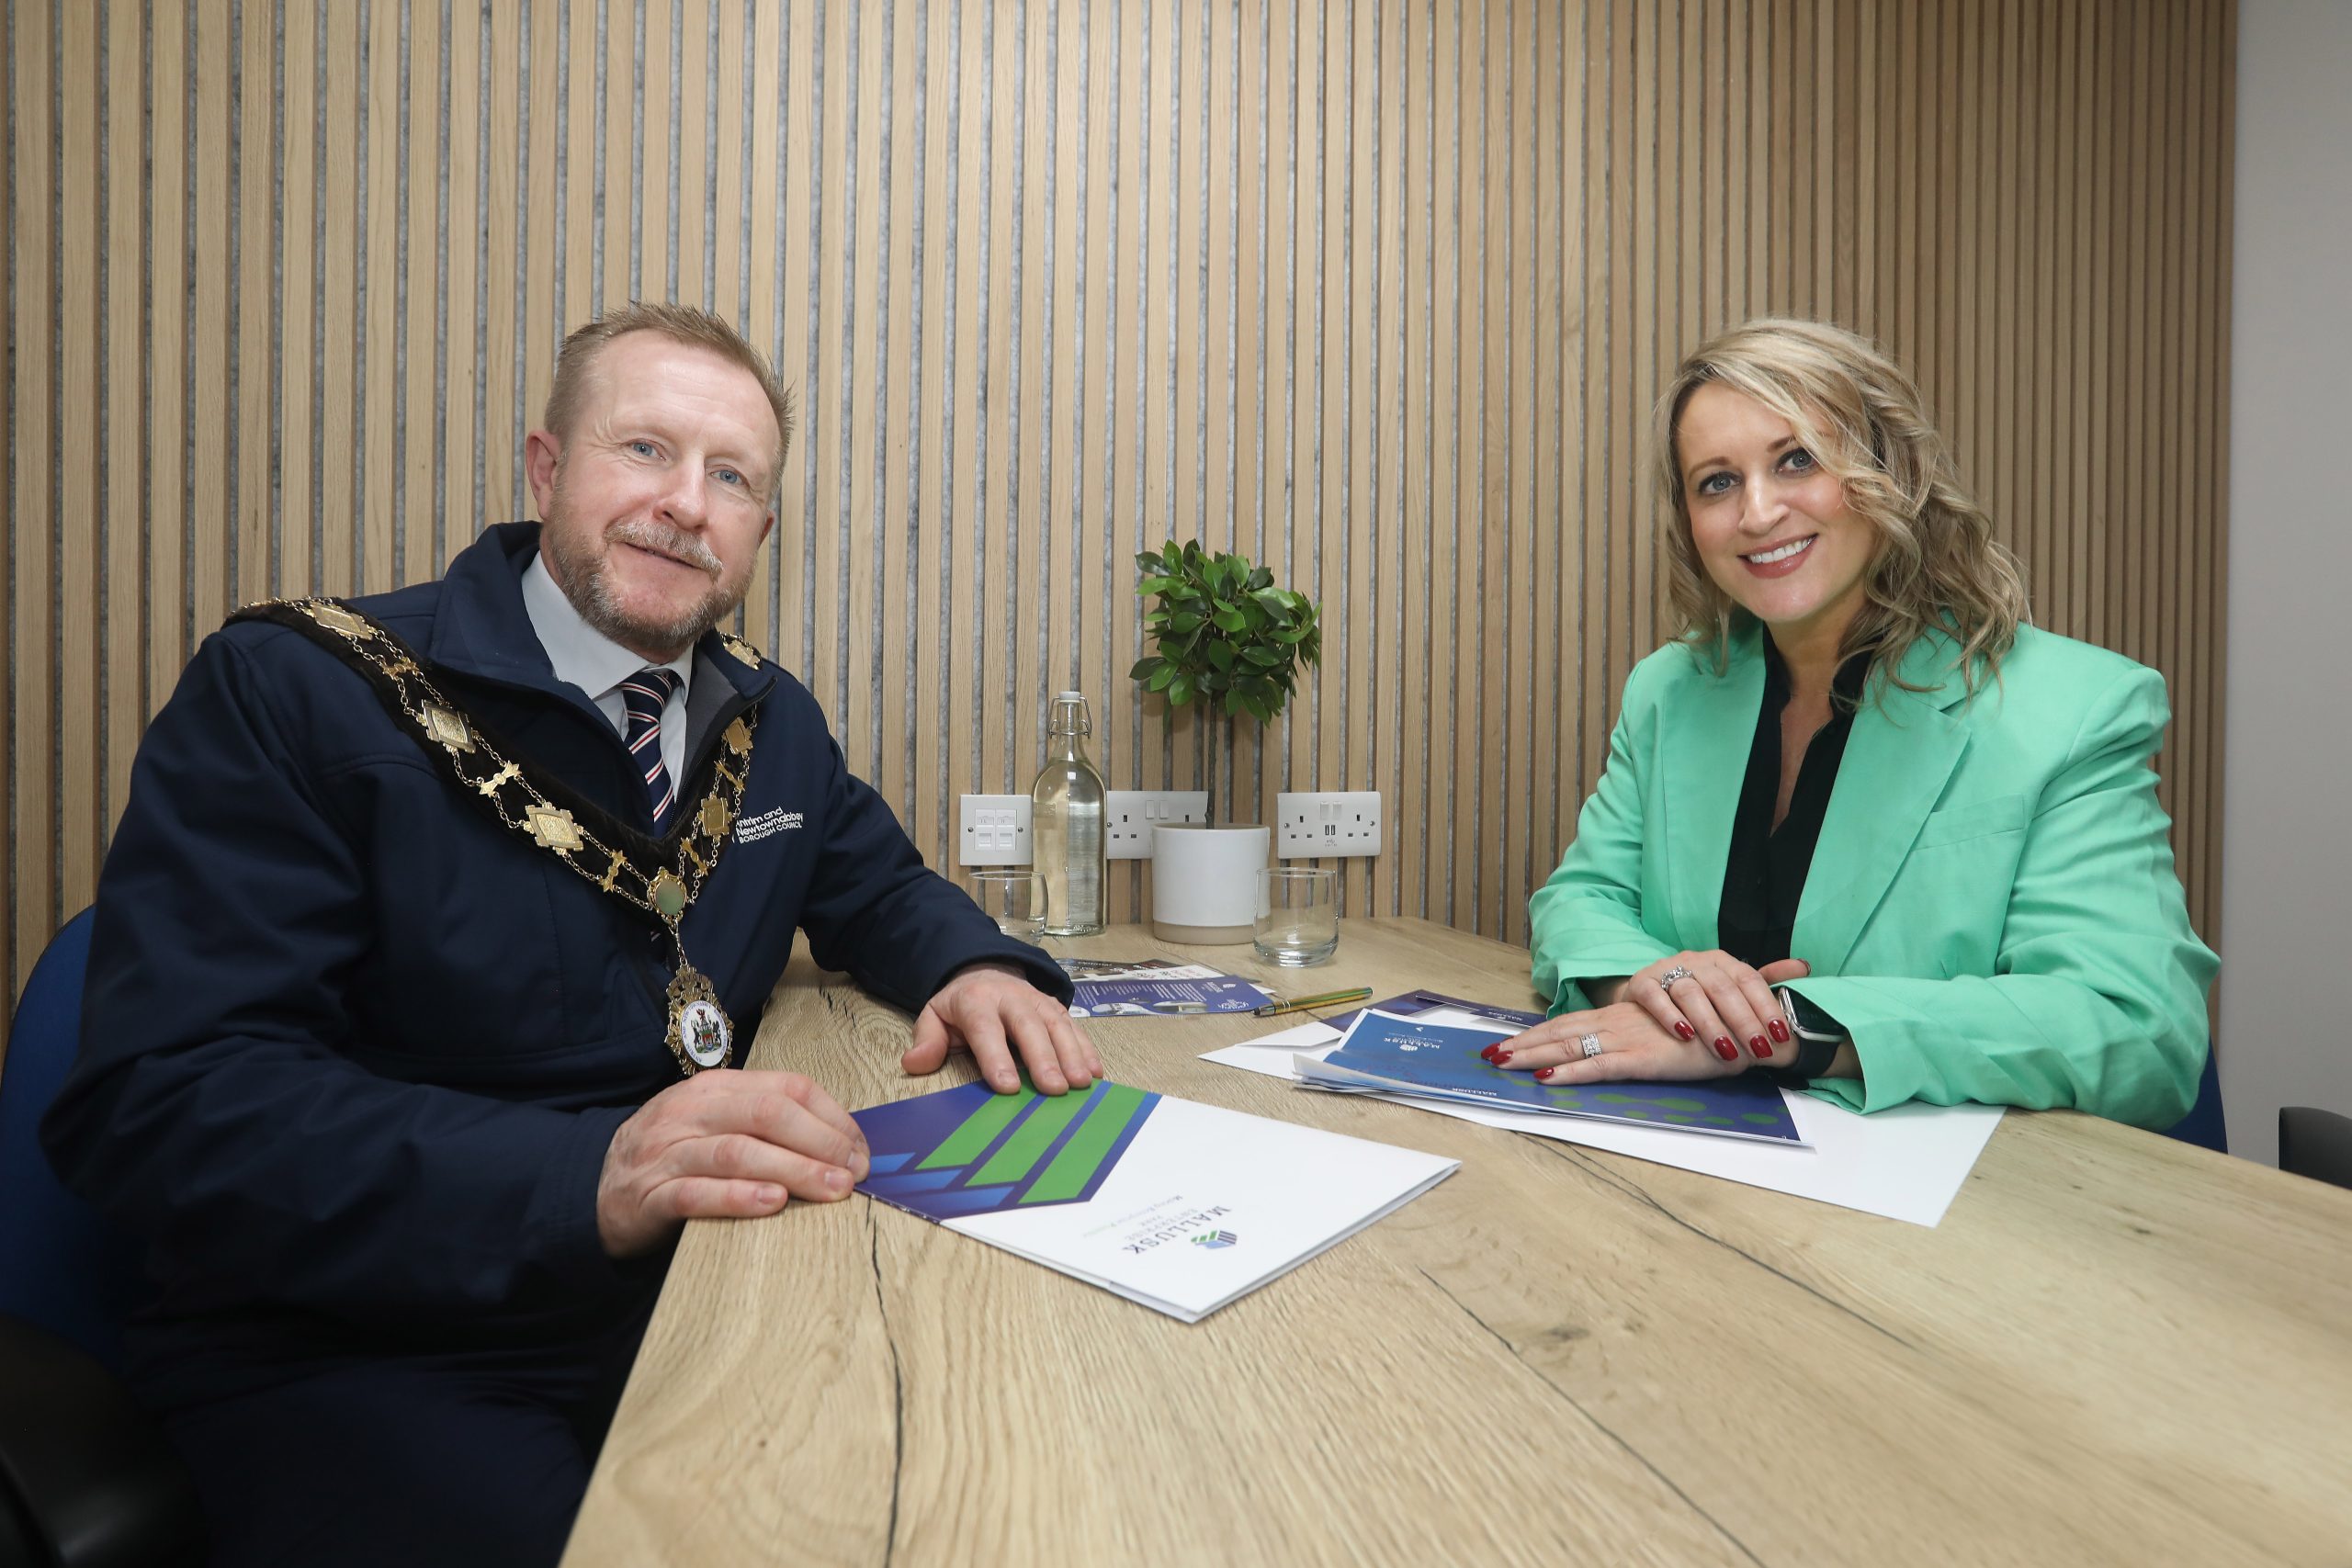 Antrim and Newtownabbey Mayor visits Mallusk Enterprise Park new Enterprise Hub space to test drive the new workspaces. Alderman Stephen Ross Photographed with CEO Emma Garrett in one of the huddle rooms small private meeting rooms in the new facility north of Belfast near Newtownabbey